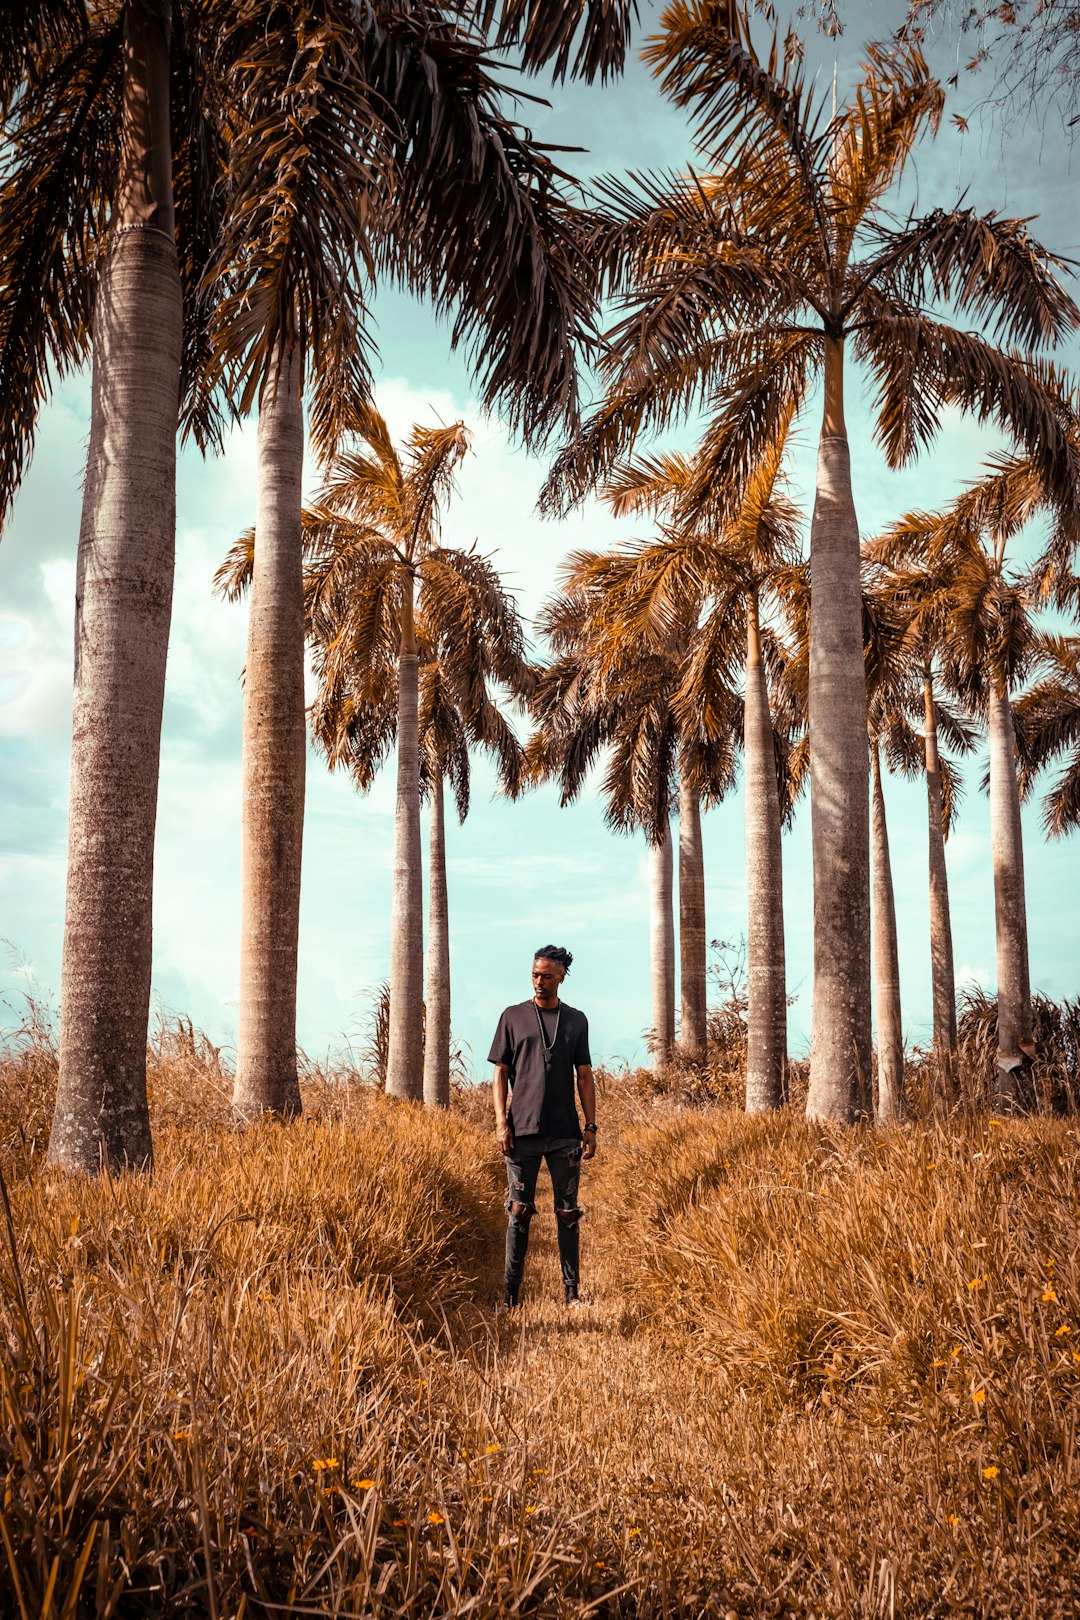 man in black jacket standing on brown grass field surrounded by green palm trees during daytime